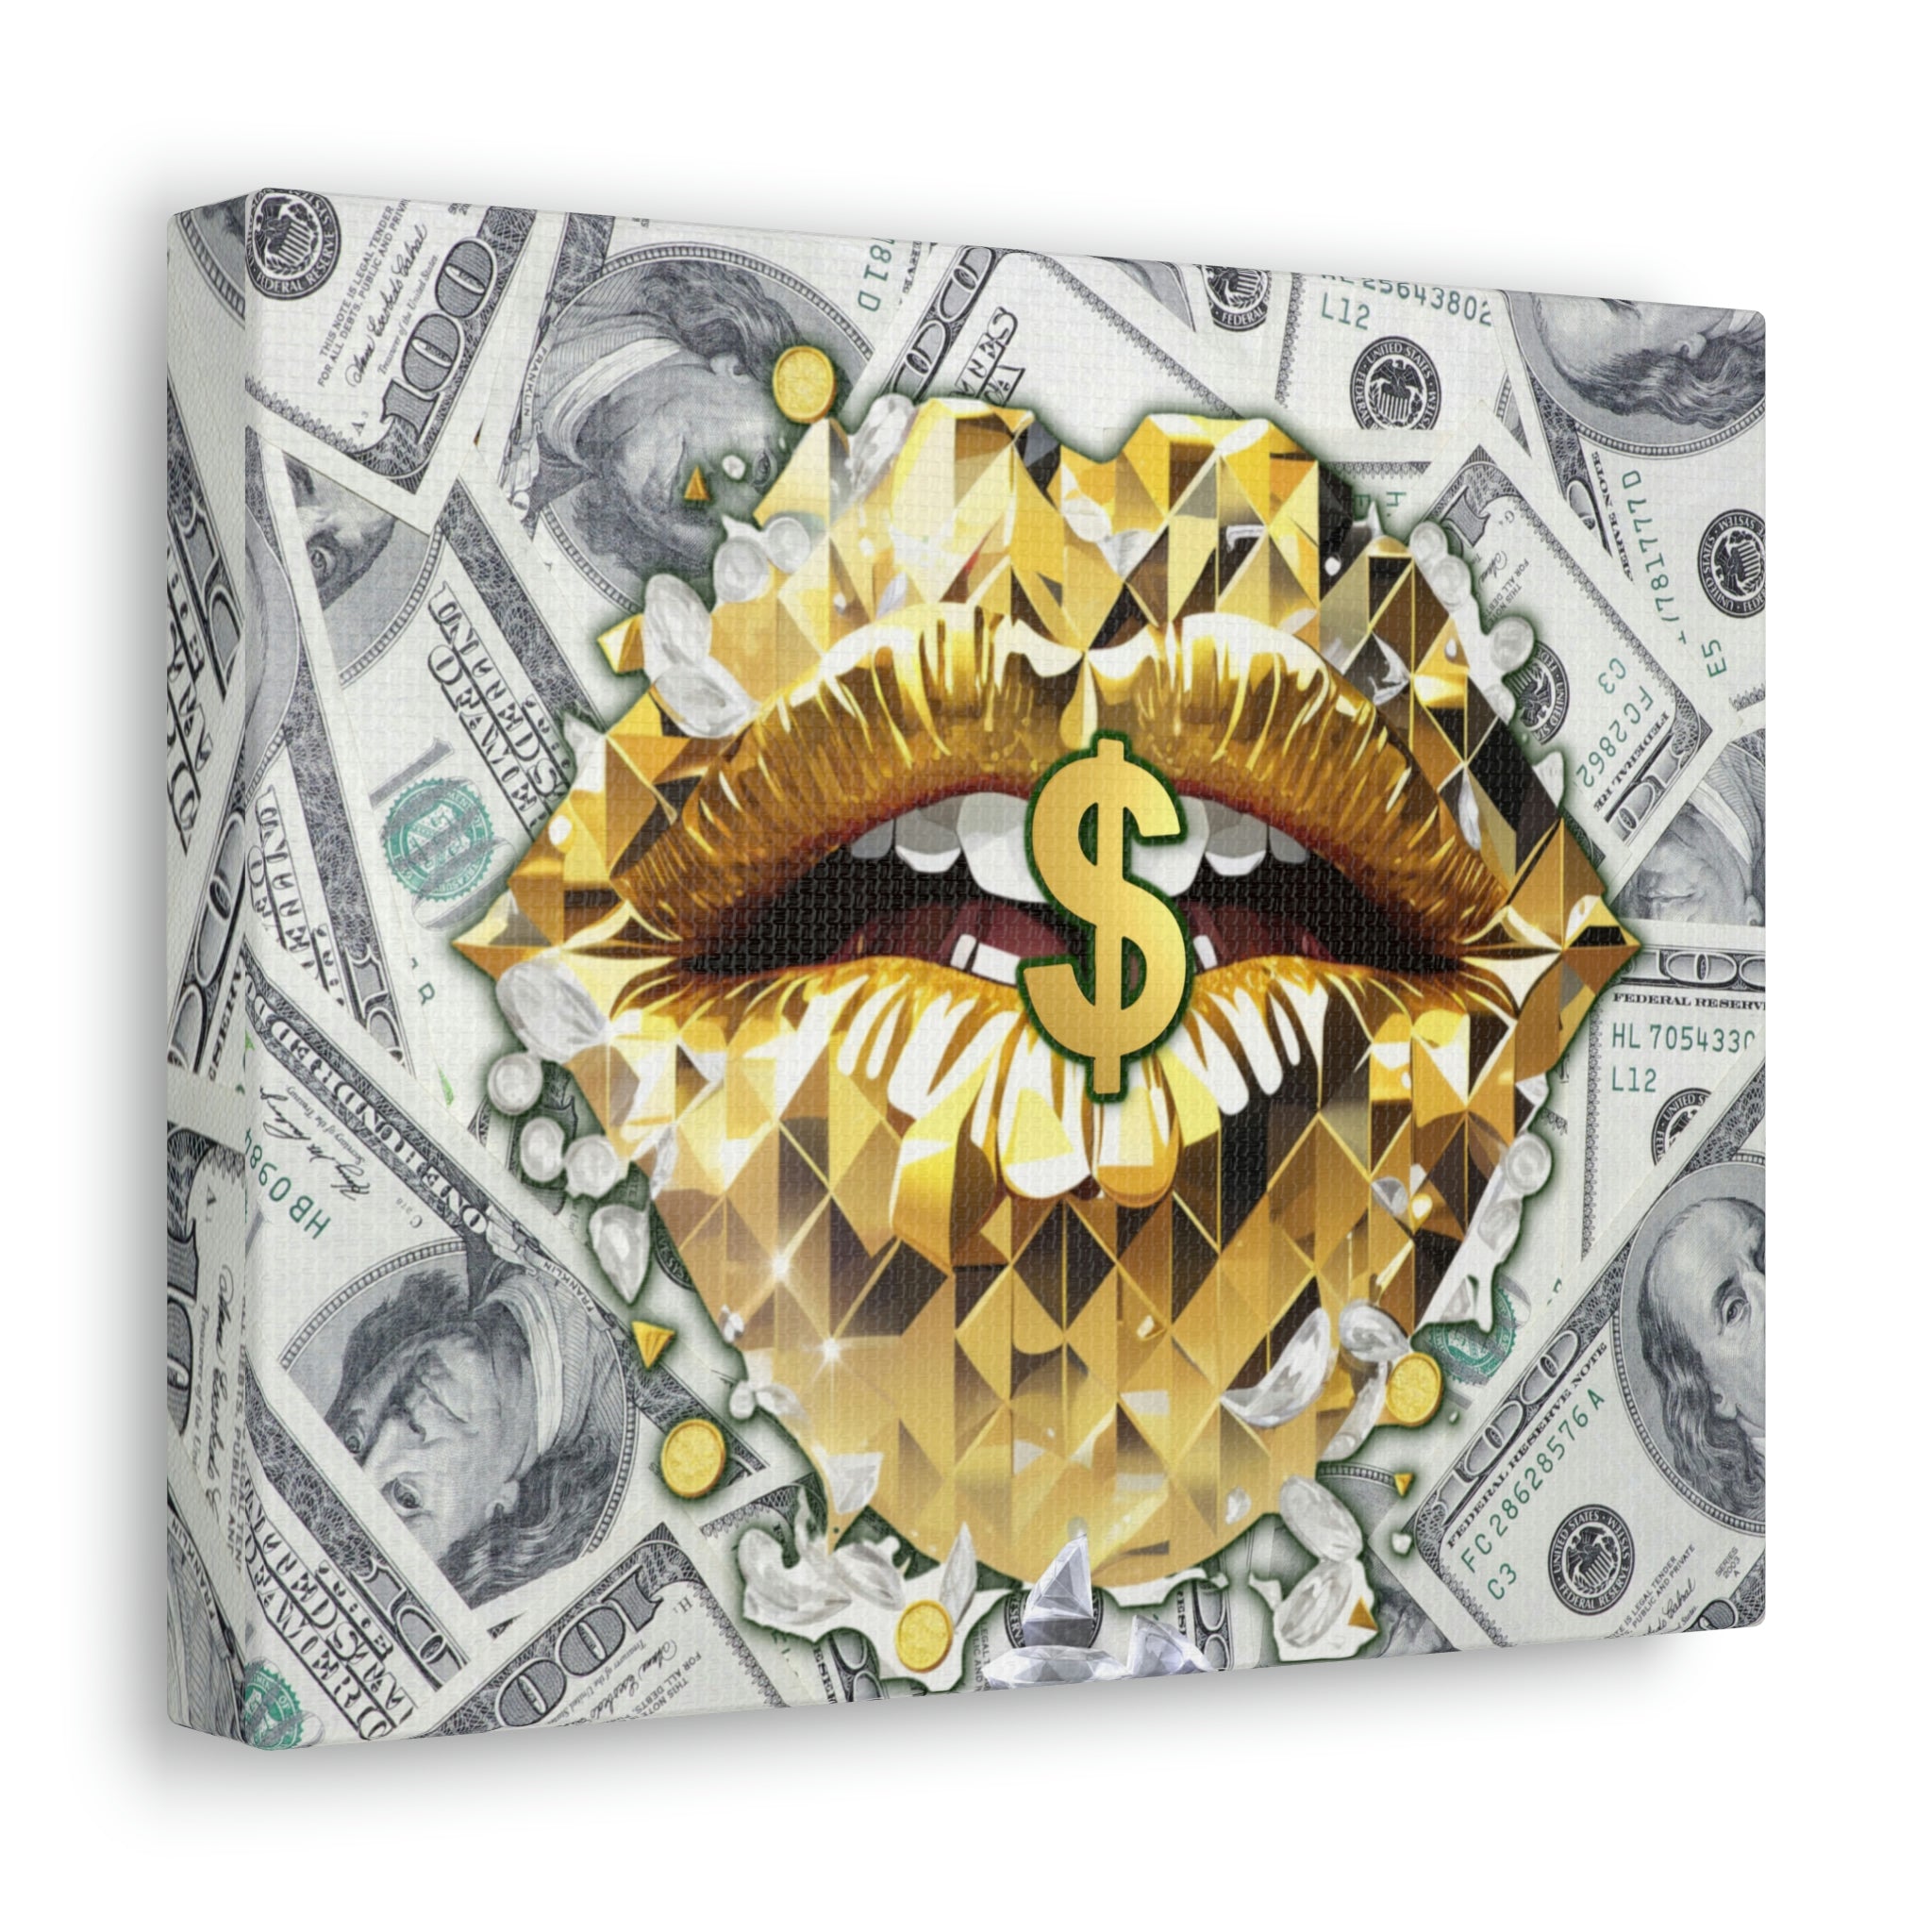 Money Talks: Gilded Lips and Golden Coins